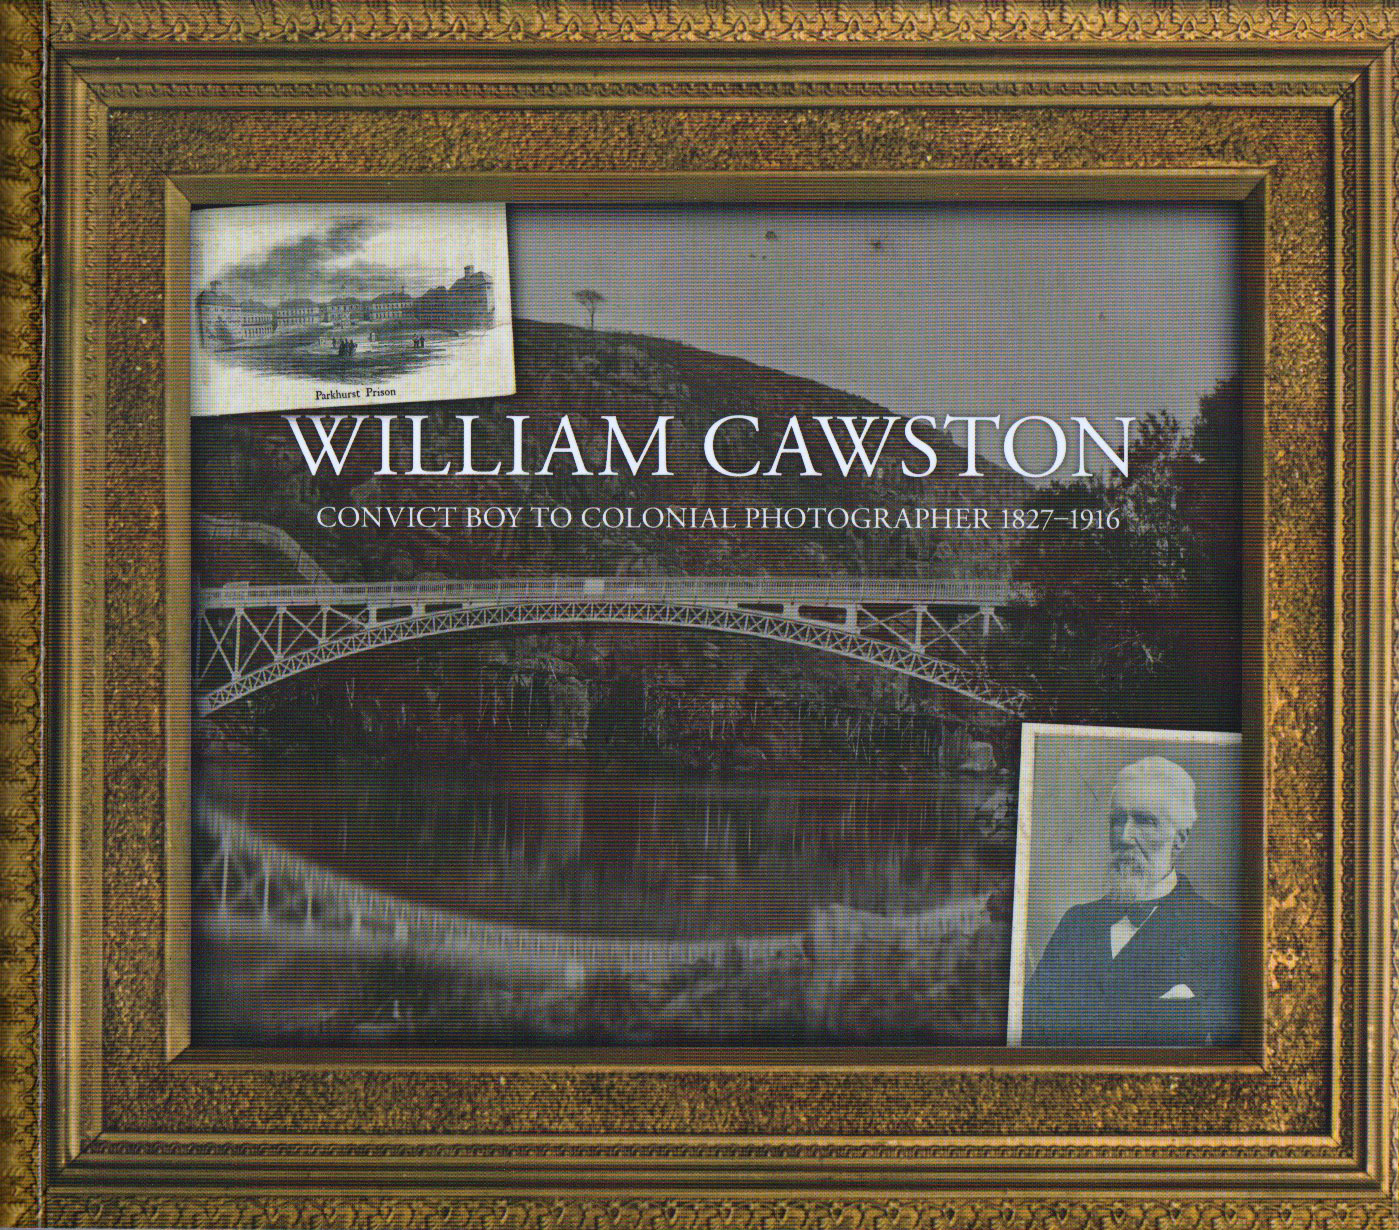 William Cawston - Convict Boy to Colonial Photographer 1827-1916 - hardcover